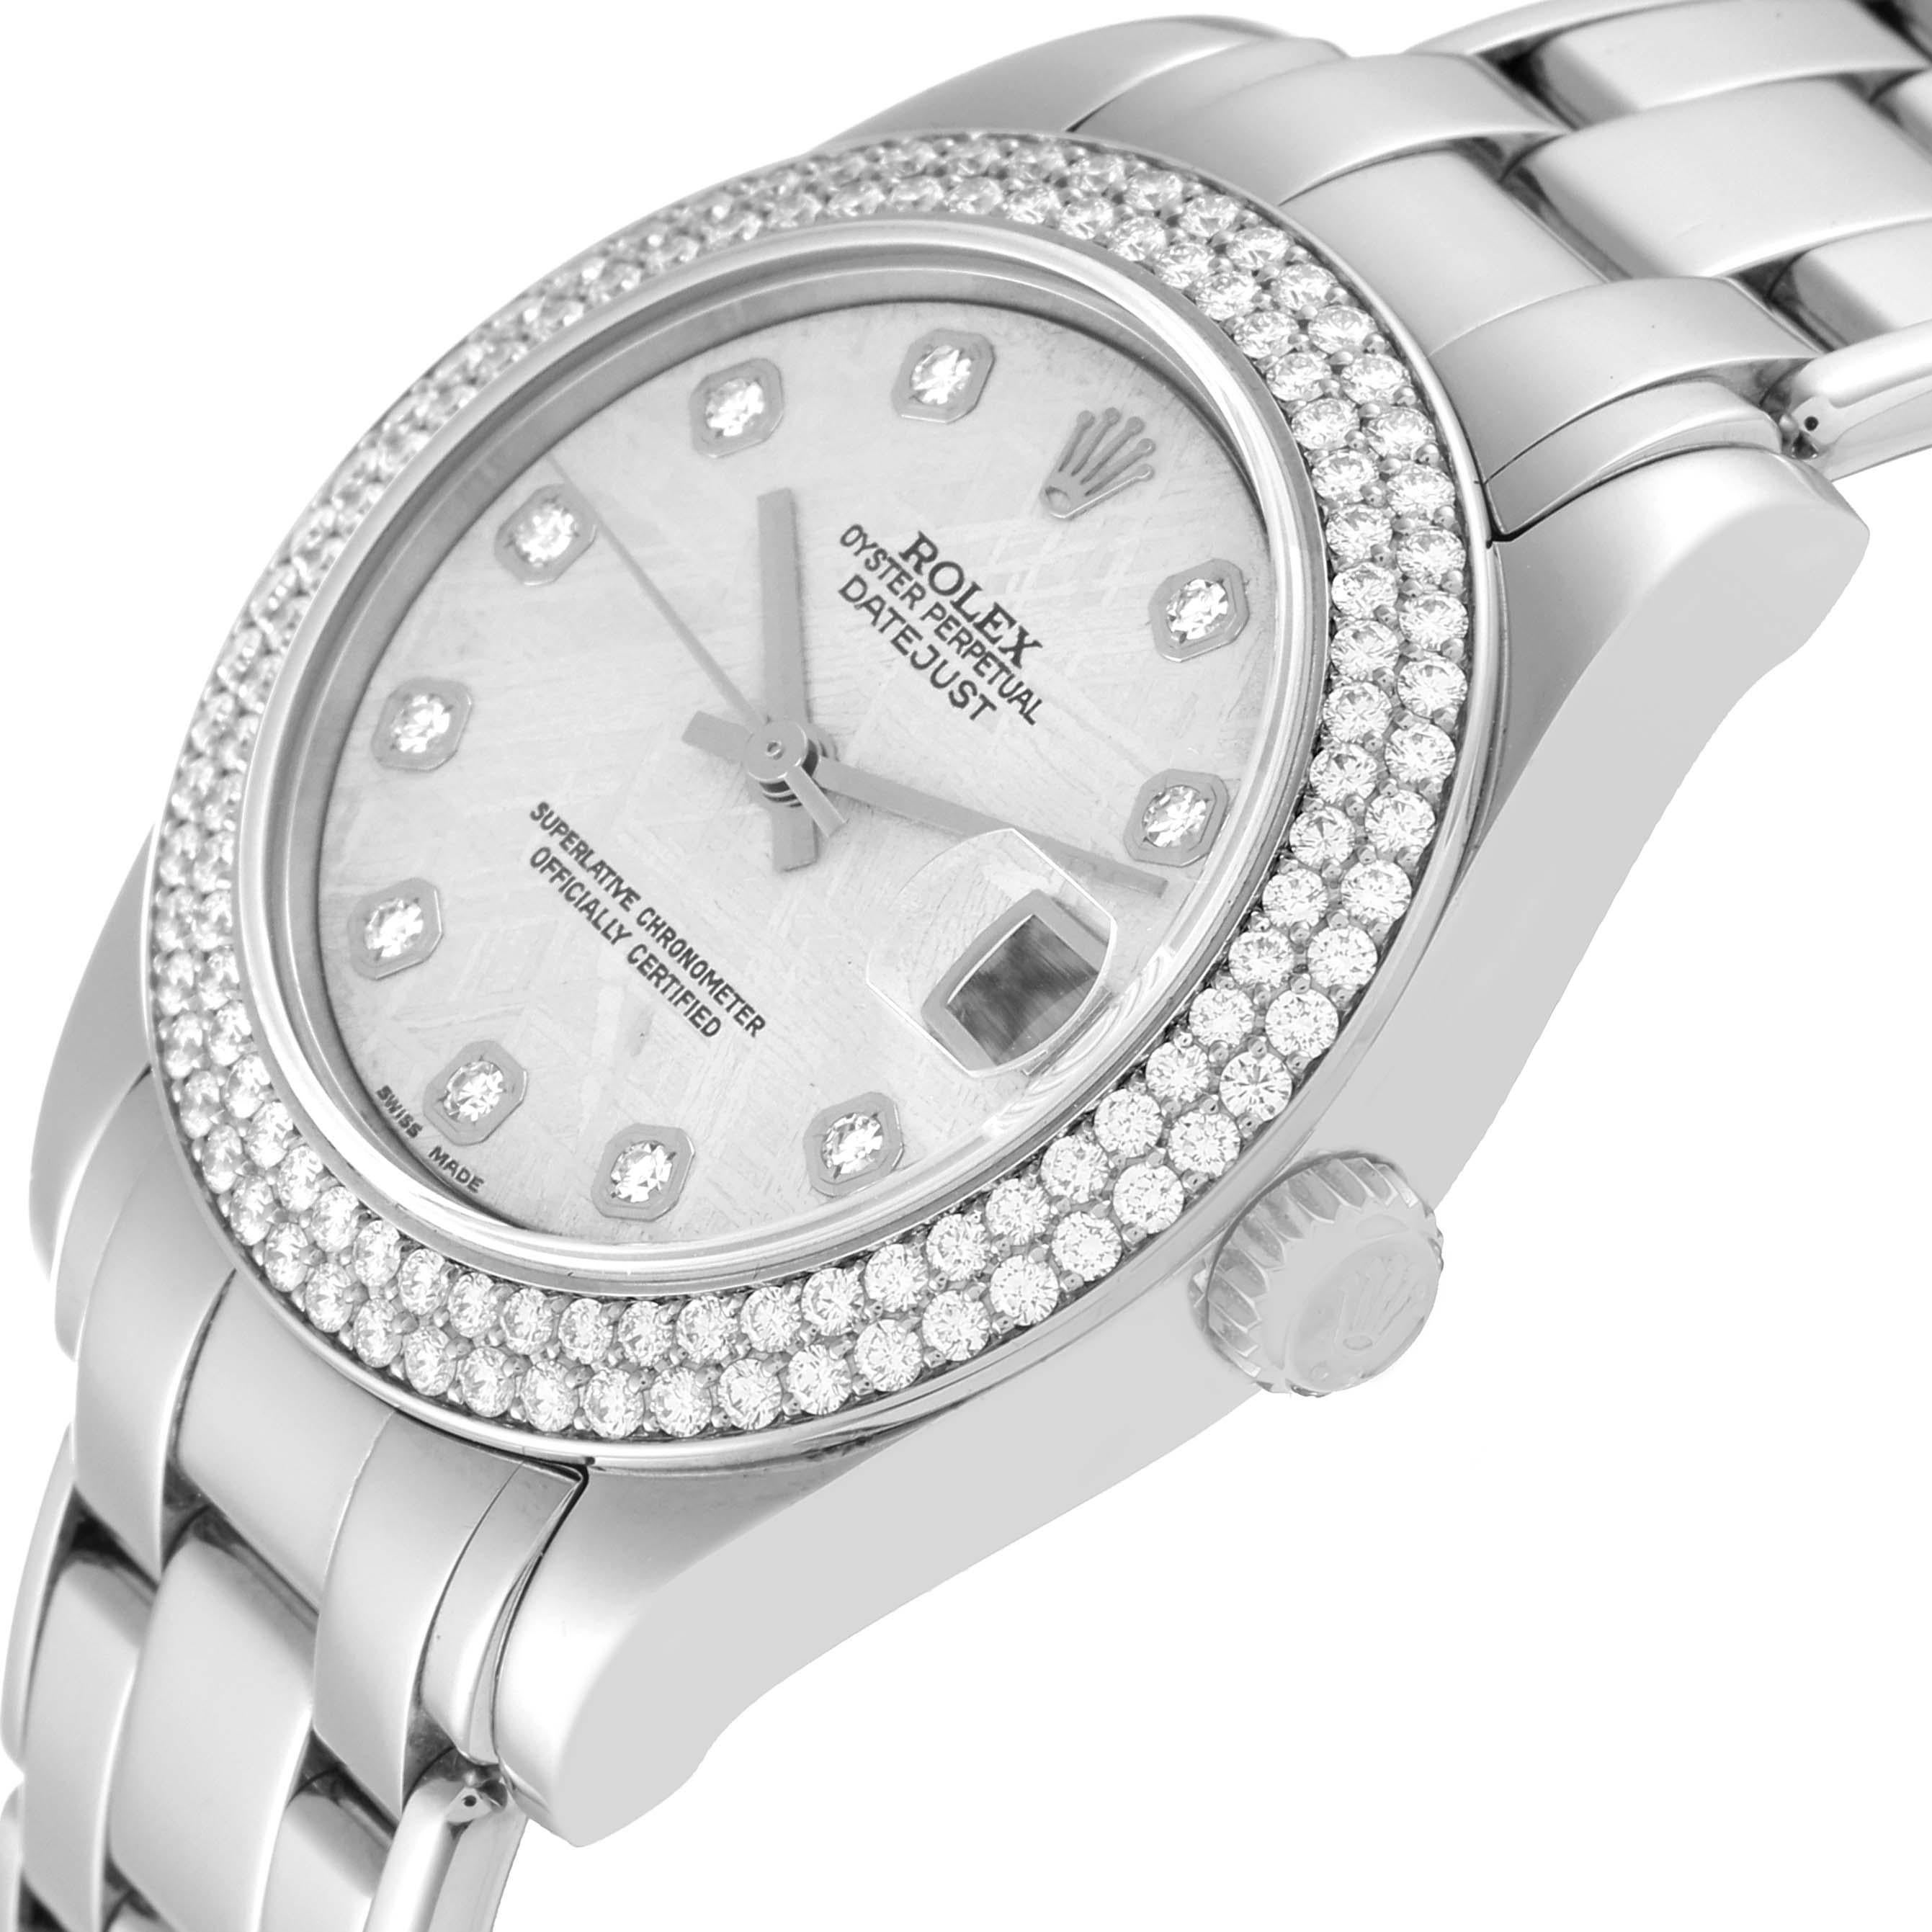 Rolex Pearlmaster 34 White Gold Meteorite Dial Diamond Ladies Watch 81339 For Sale 1